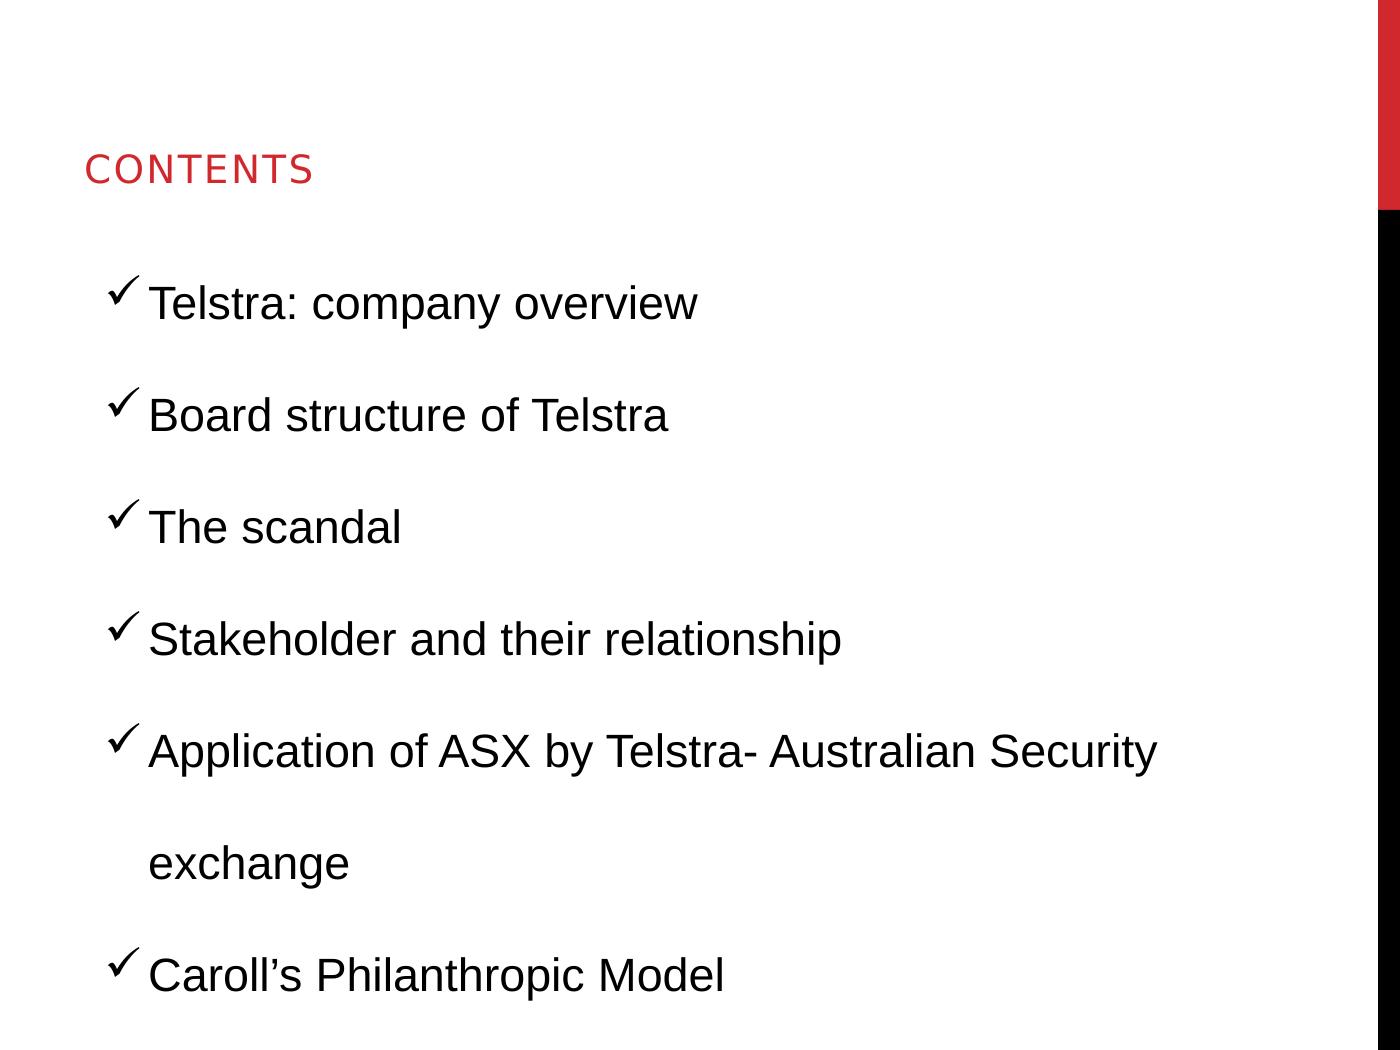 Telstra: Corporate Governance, Ethics and Corporate Social Responsibility_2